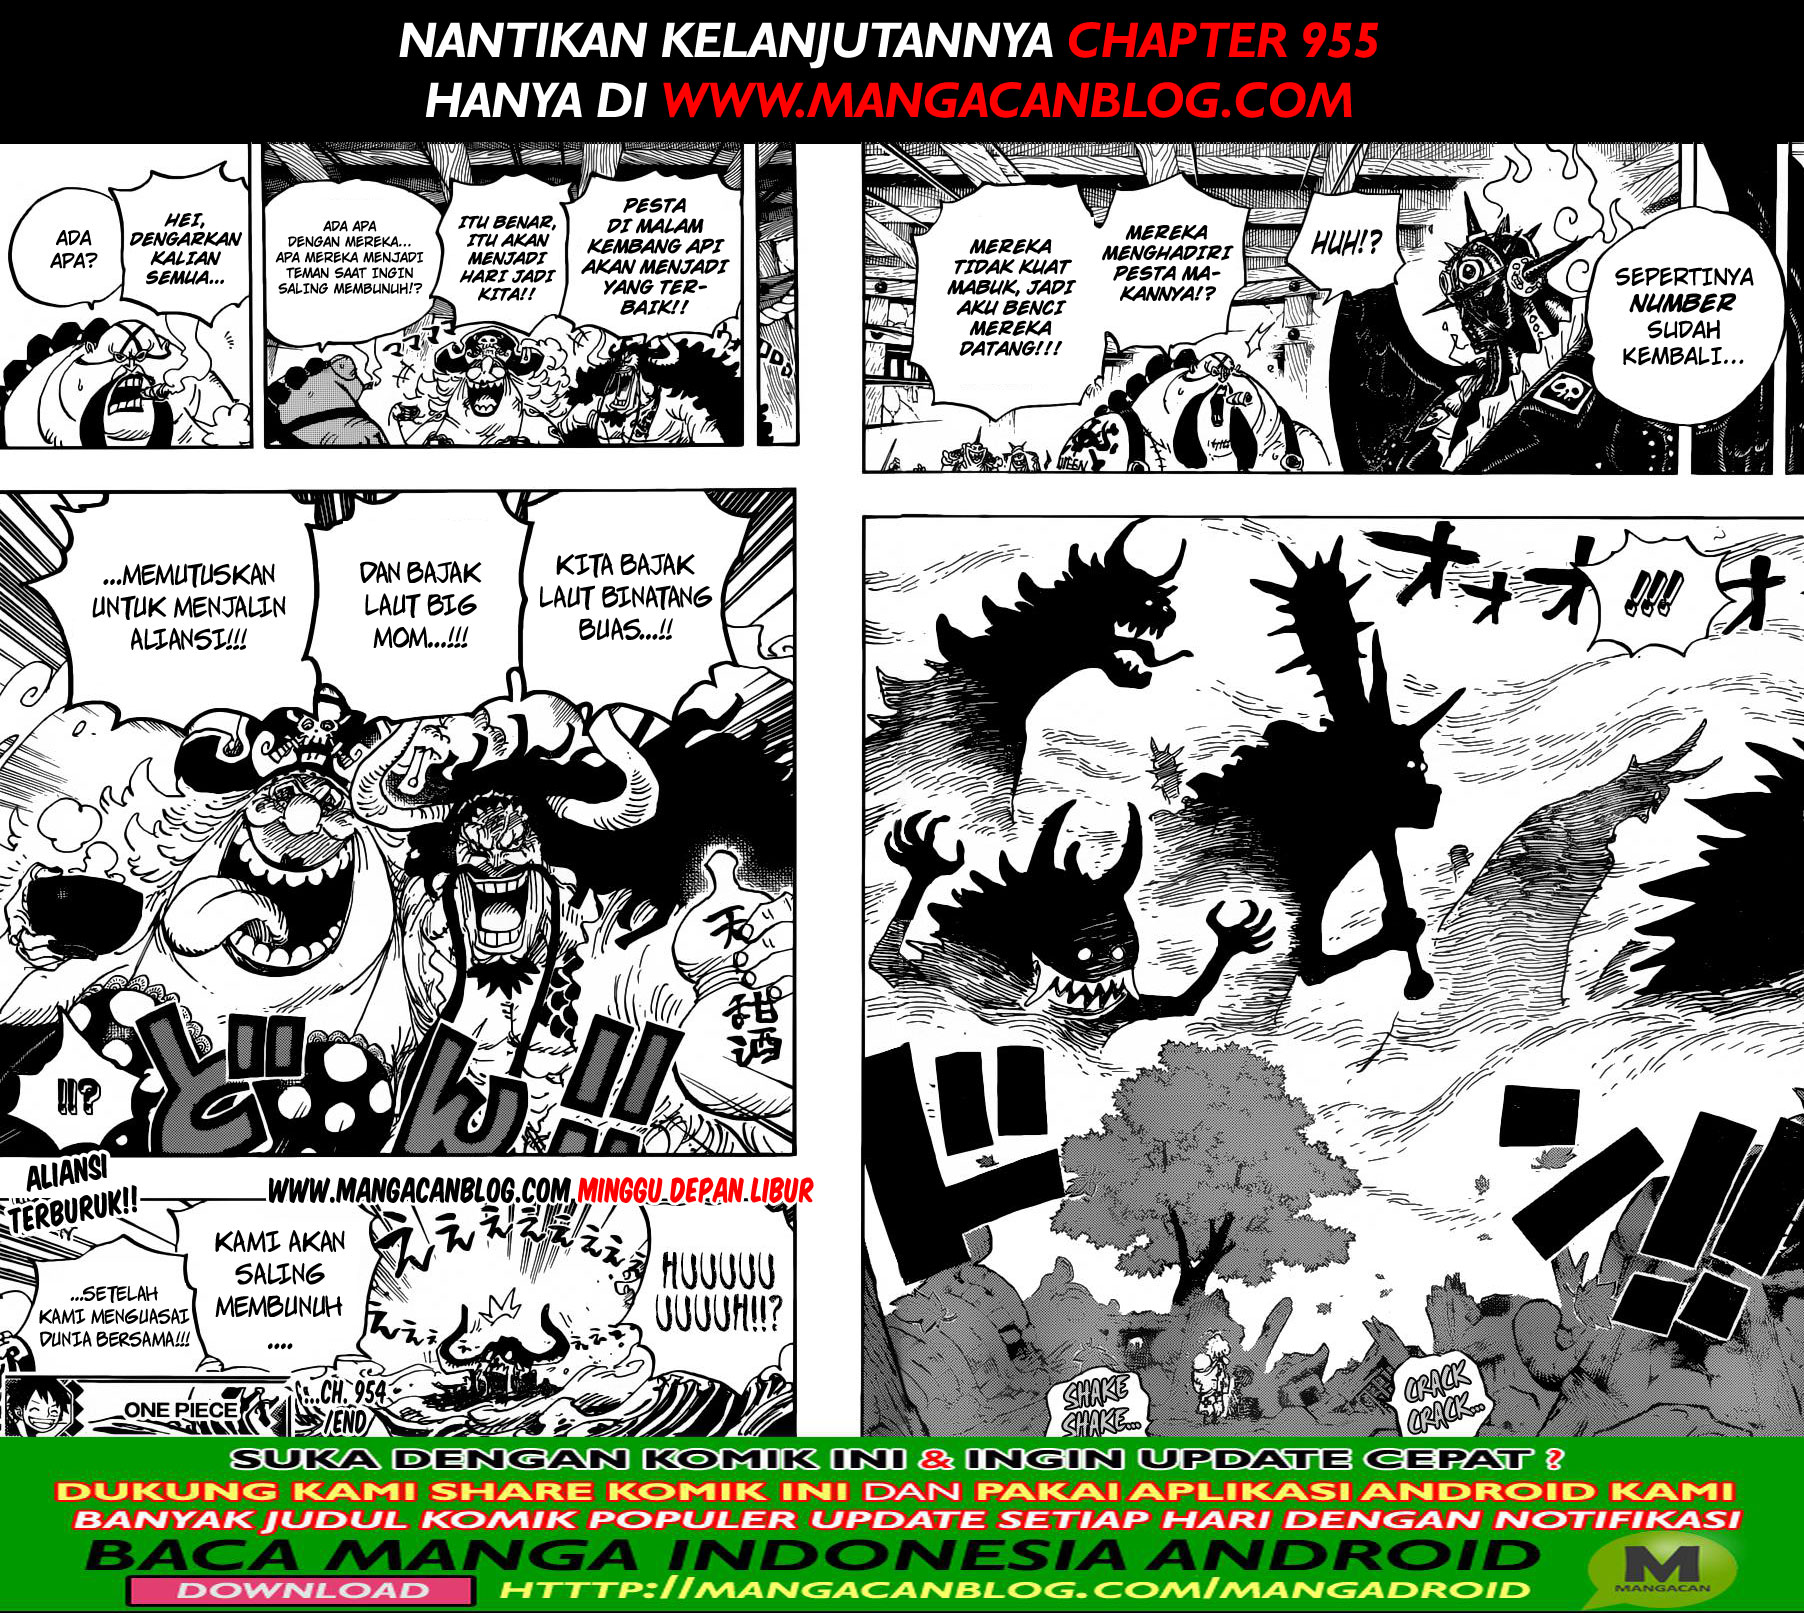 One Piece Chapter 954